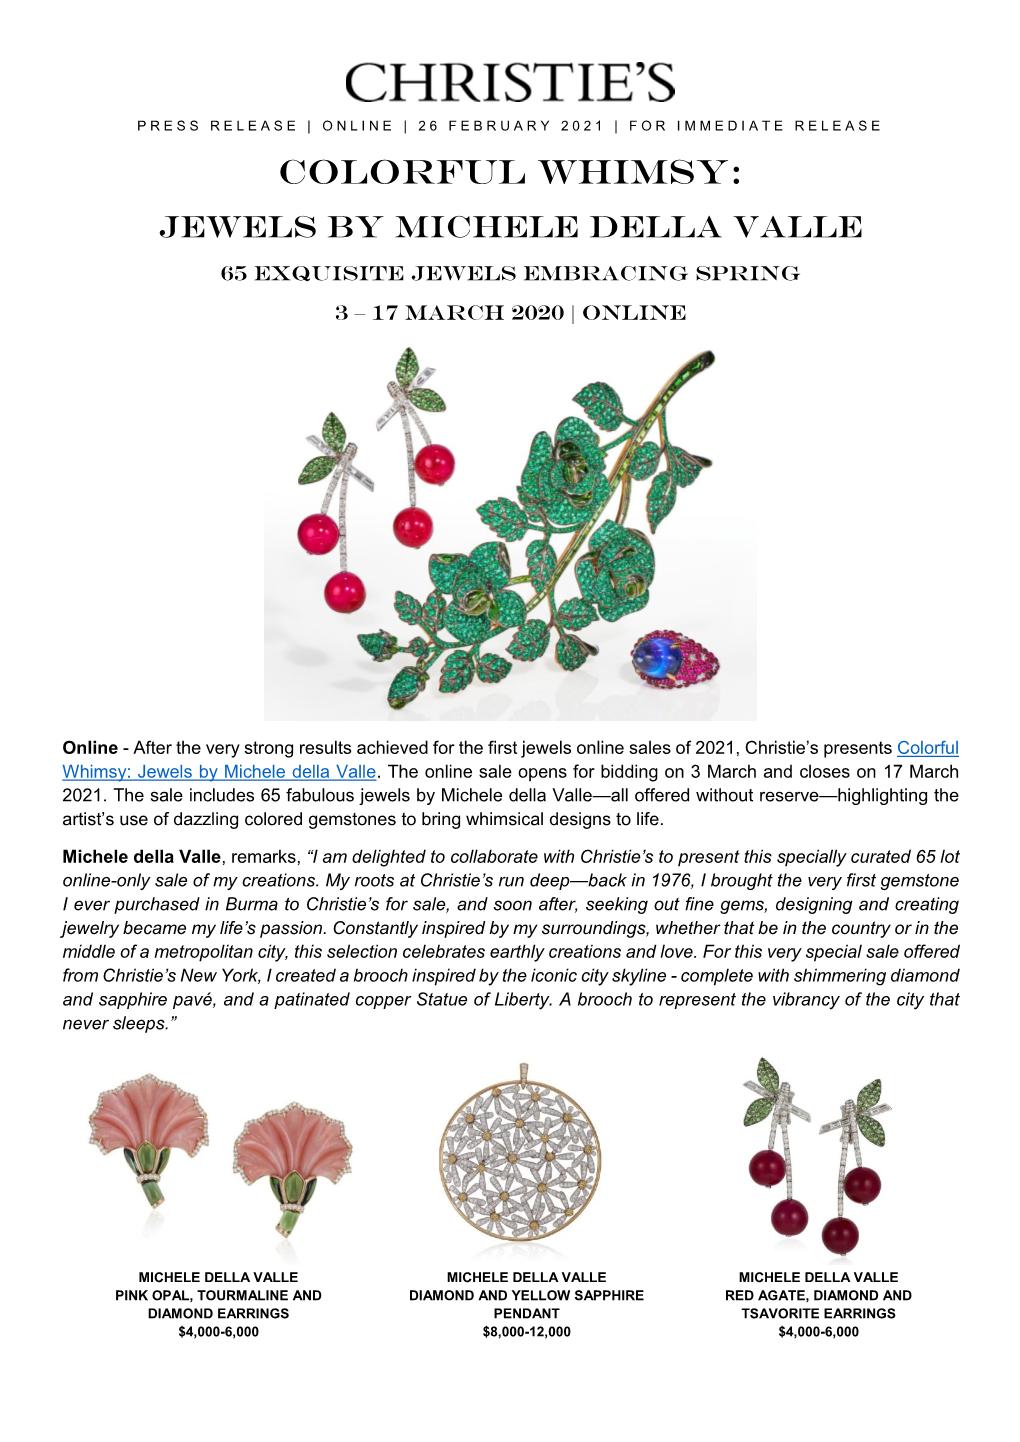 Colorful Whimsy: Jewels by Michele Della Valle